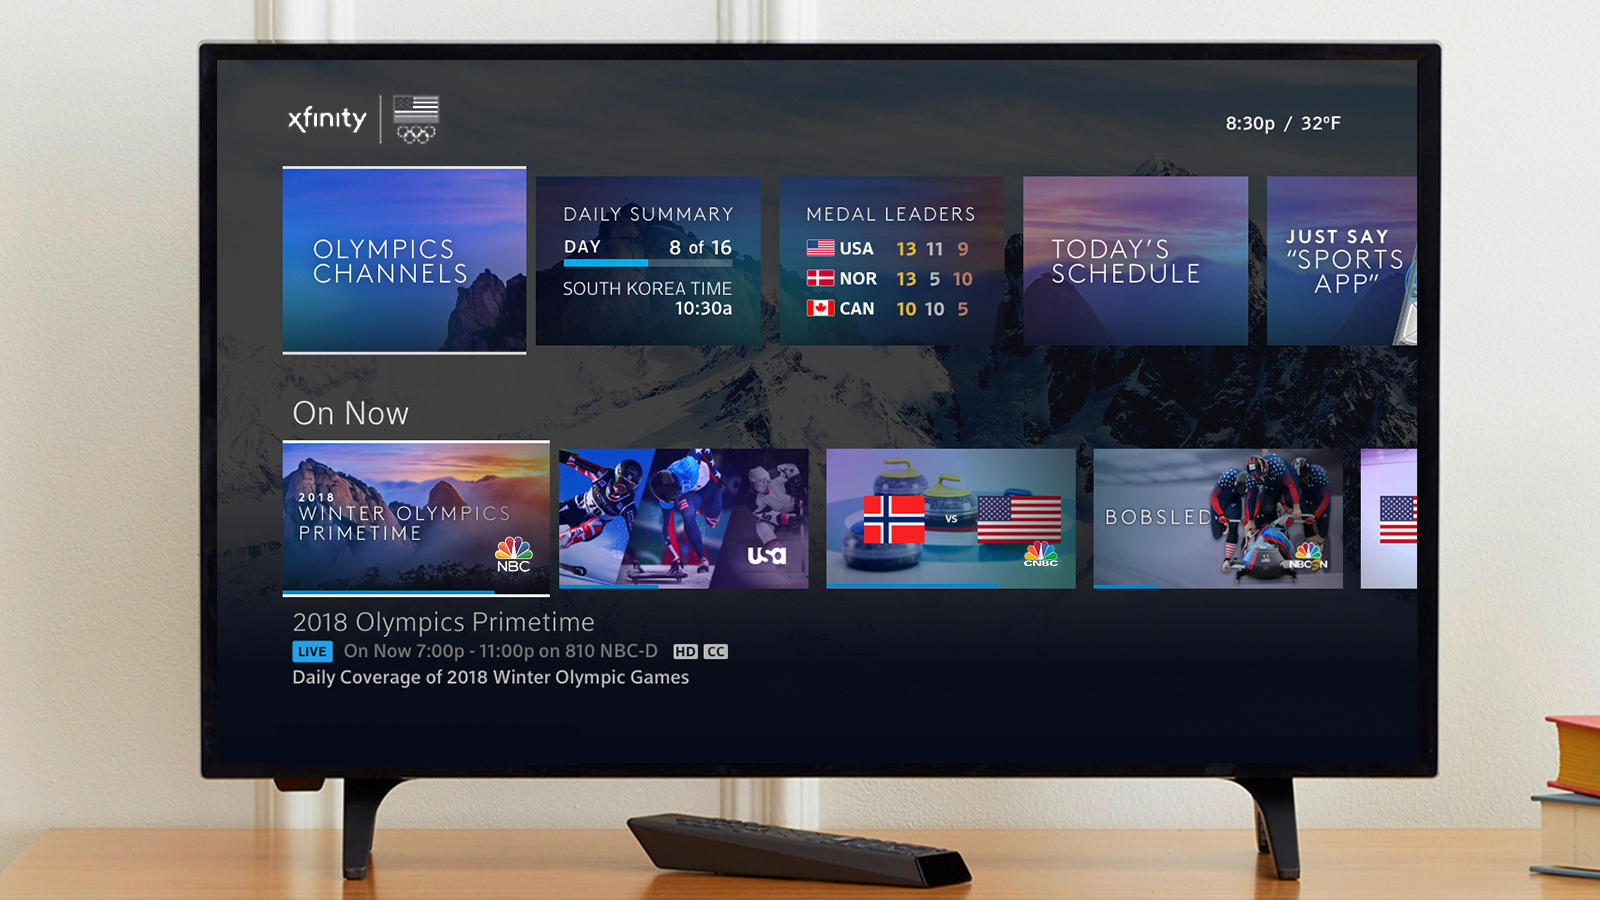 Comcast Unveils Unparalleled Winter Olympics Viewing Experience for Xfinity TV Customers acro...